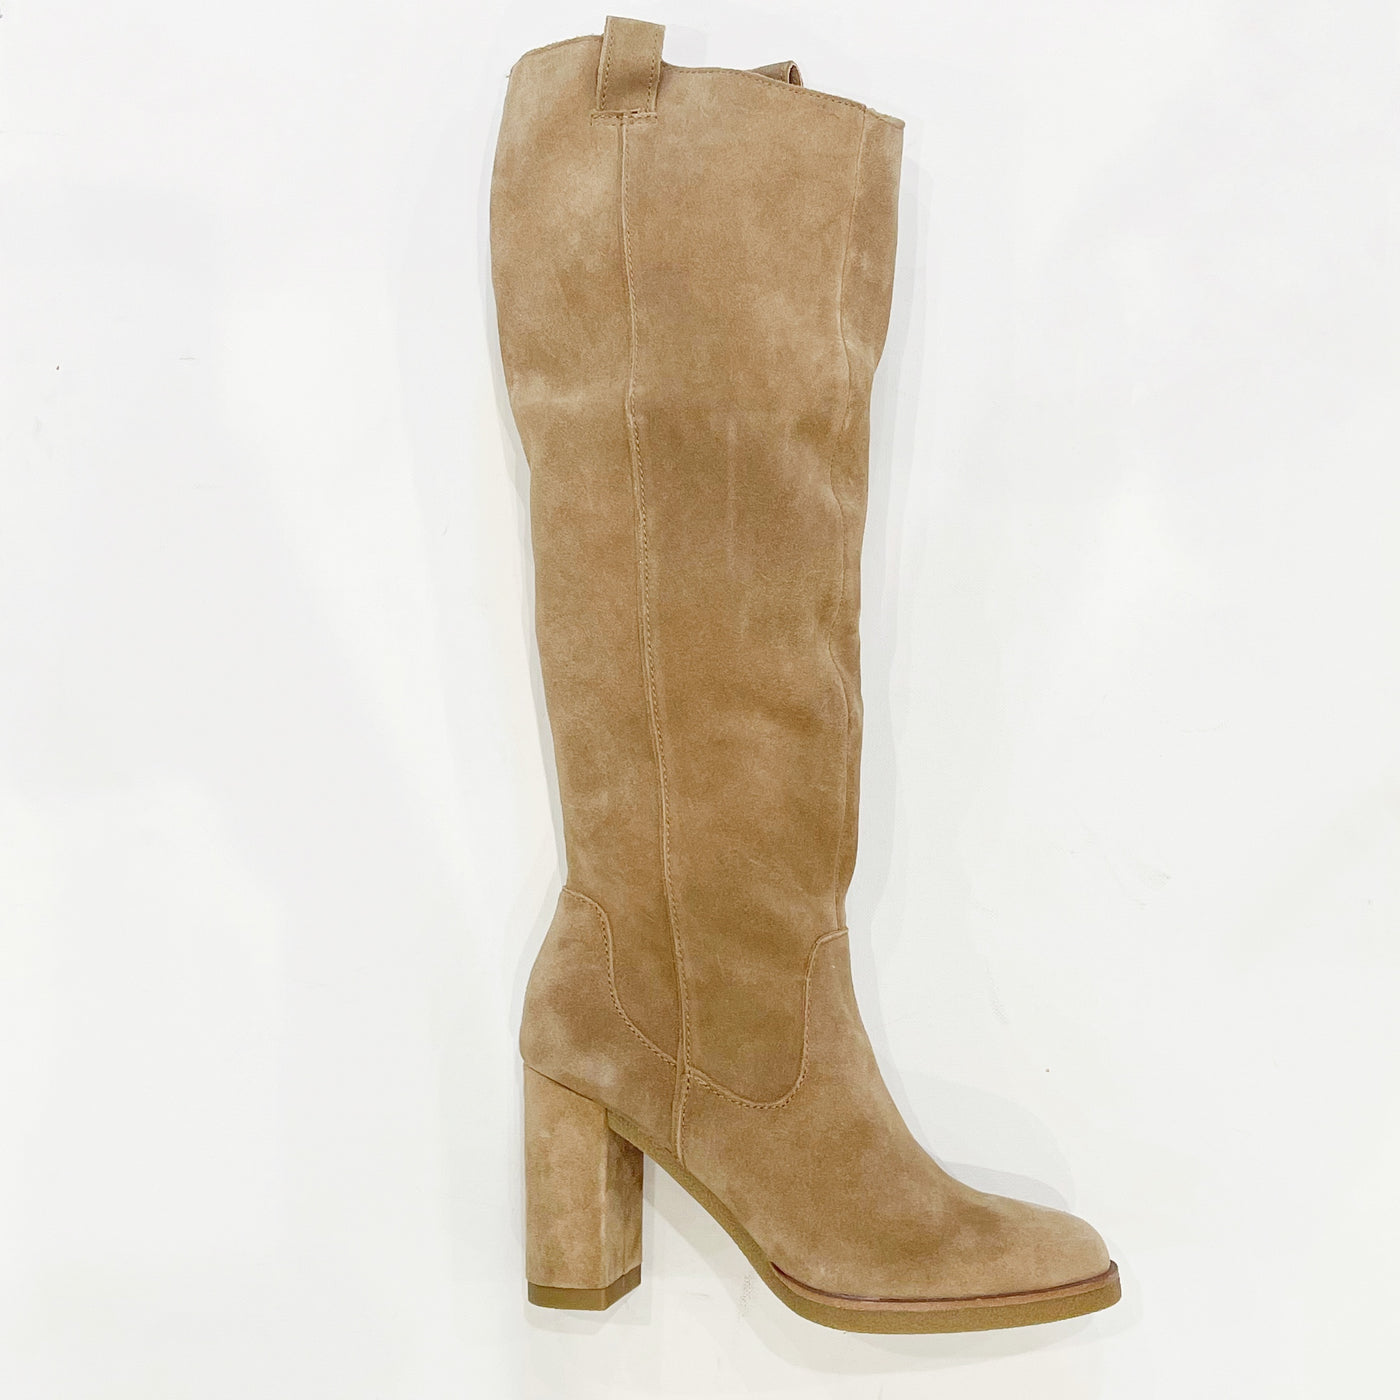 Dolce Vita | Sarie Boots | Truffle Suede - Poppy and Stella